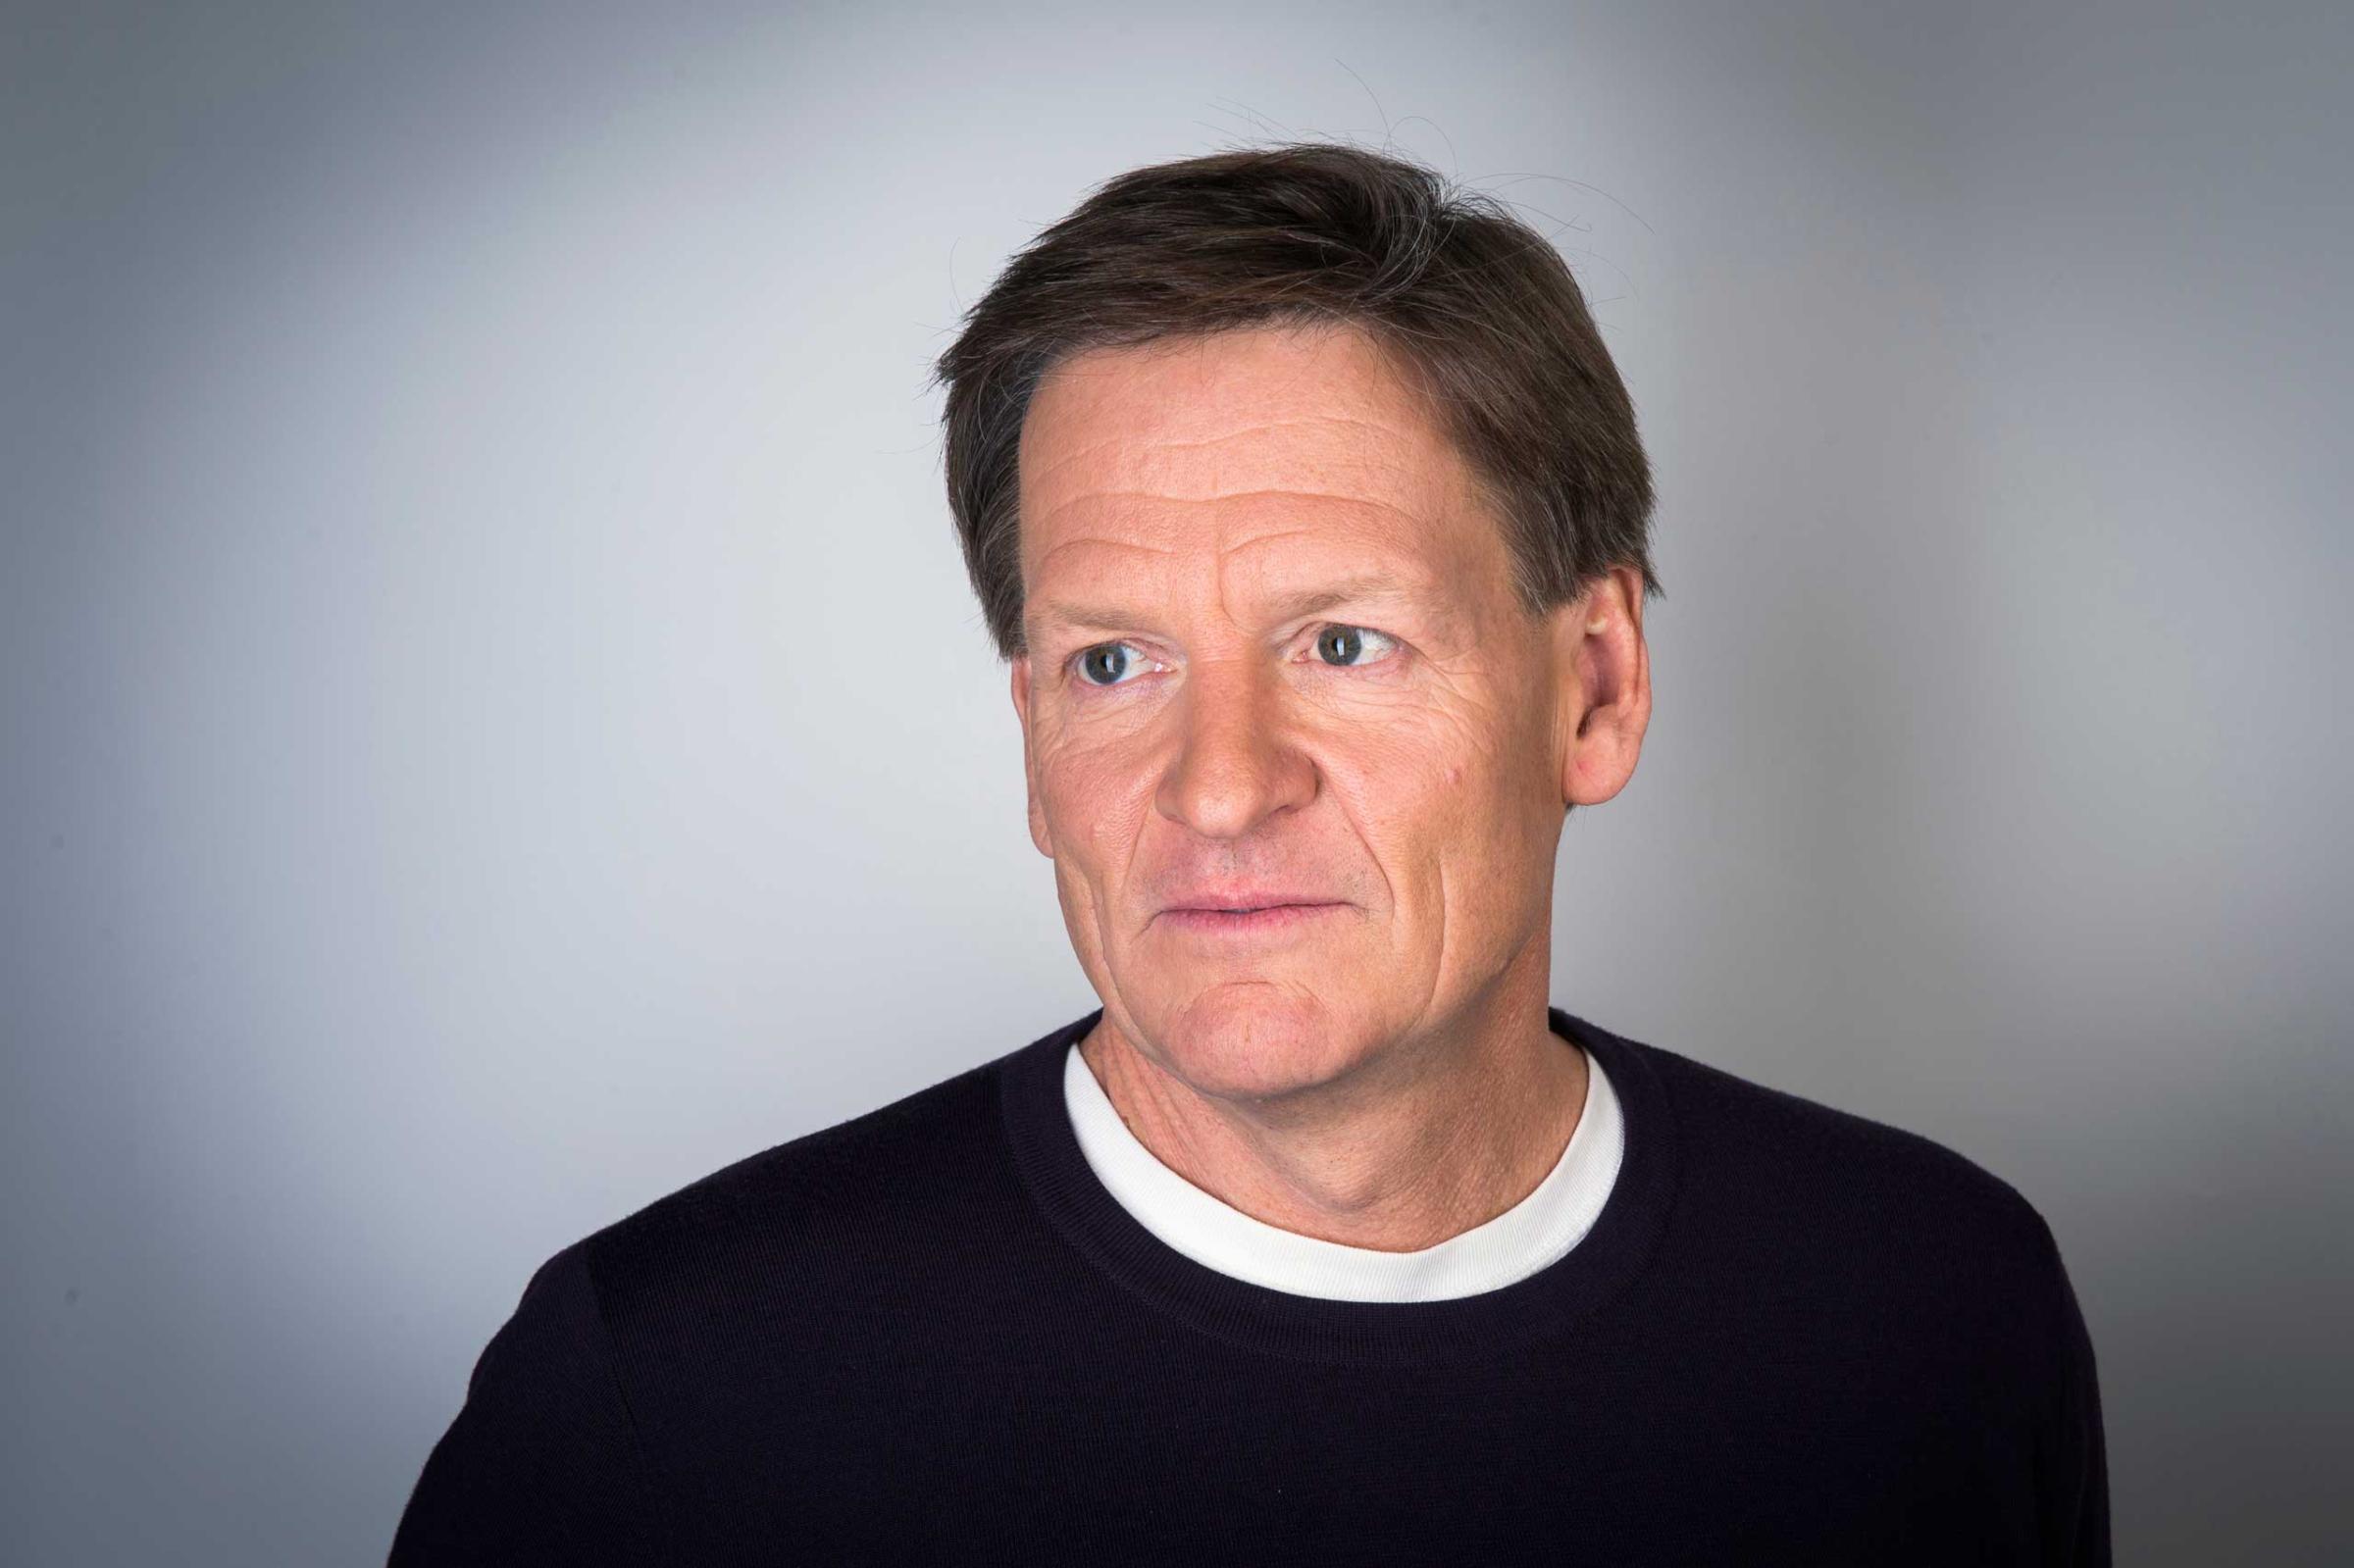 Author Michael Lewis poses for a portrait while promoting his book about high-frequency trading (HFT) named "Flash Boys: A Wall Street Revolt," in New York